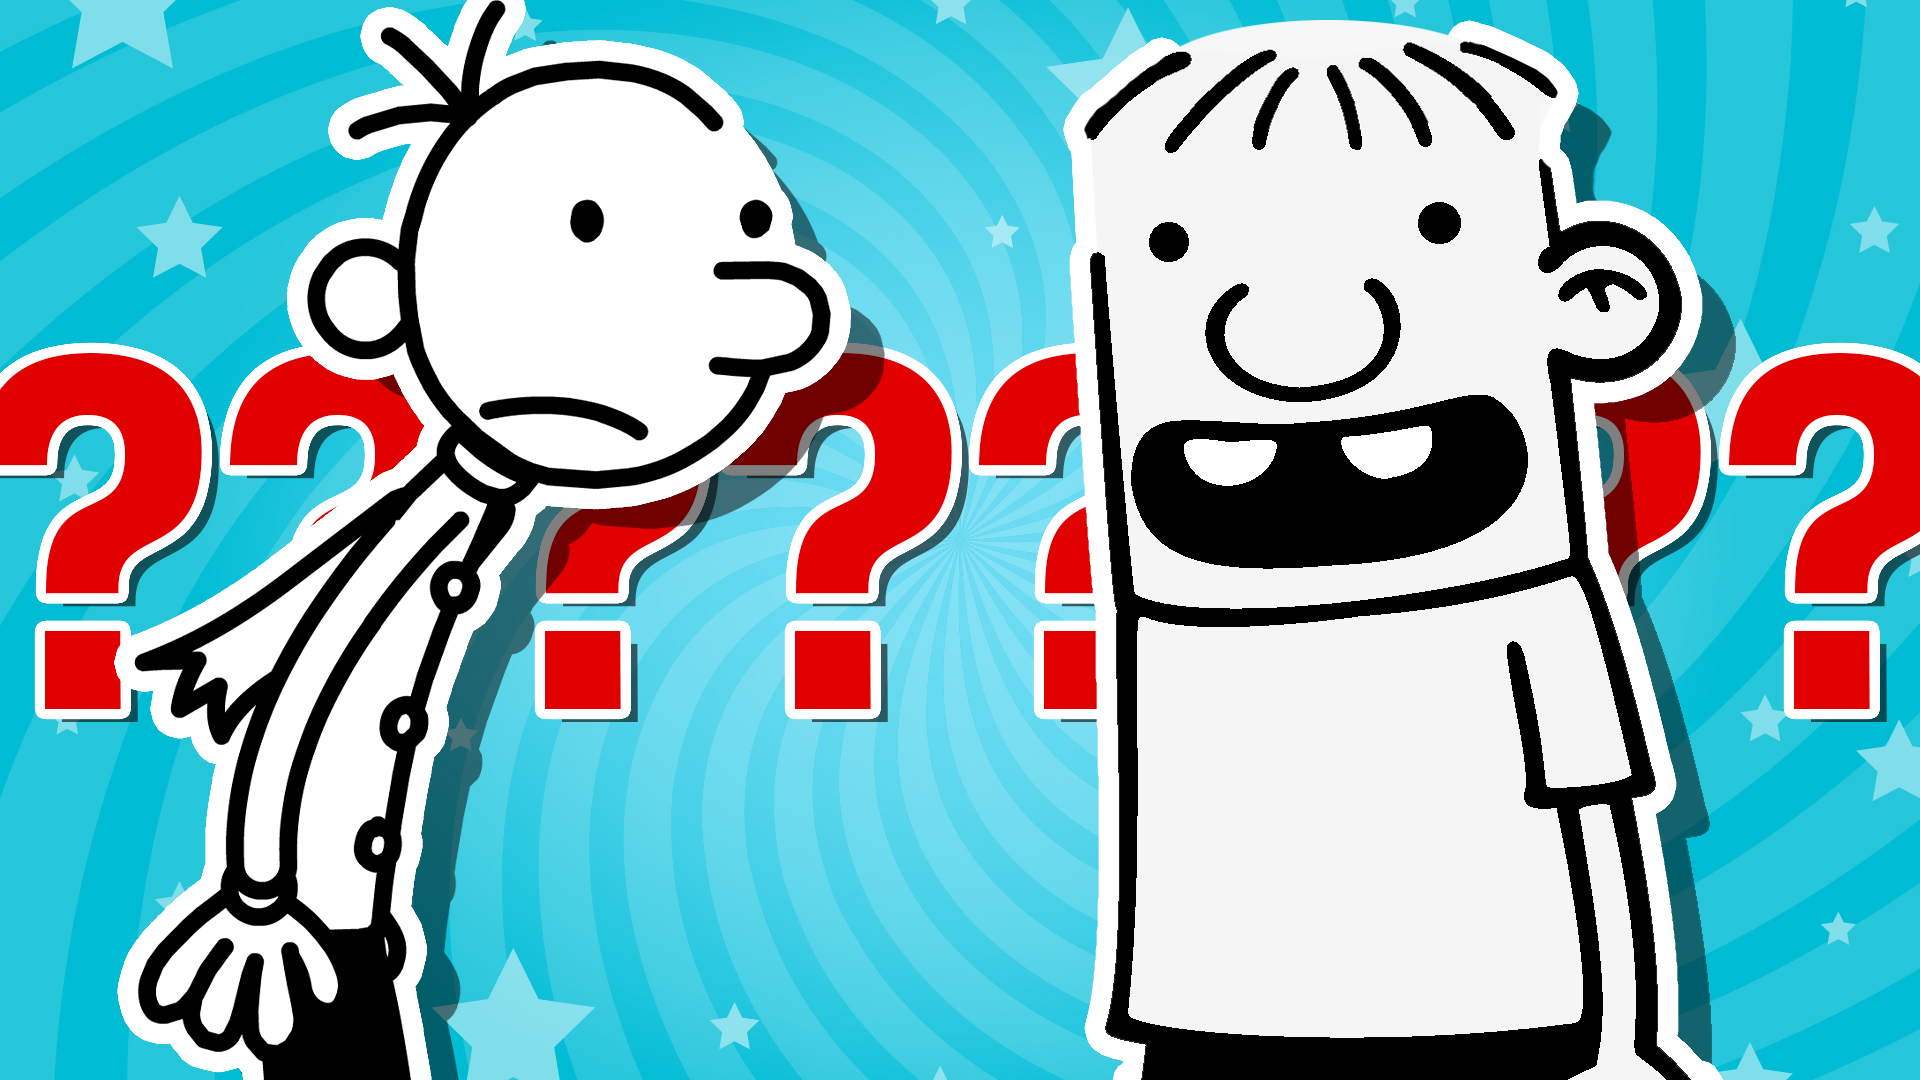 Diary of a Wimpy Kid quiz